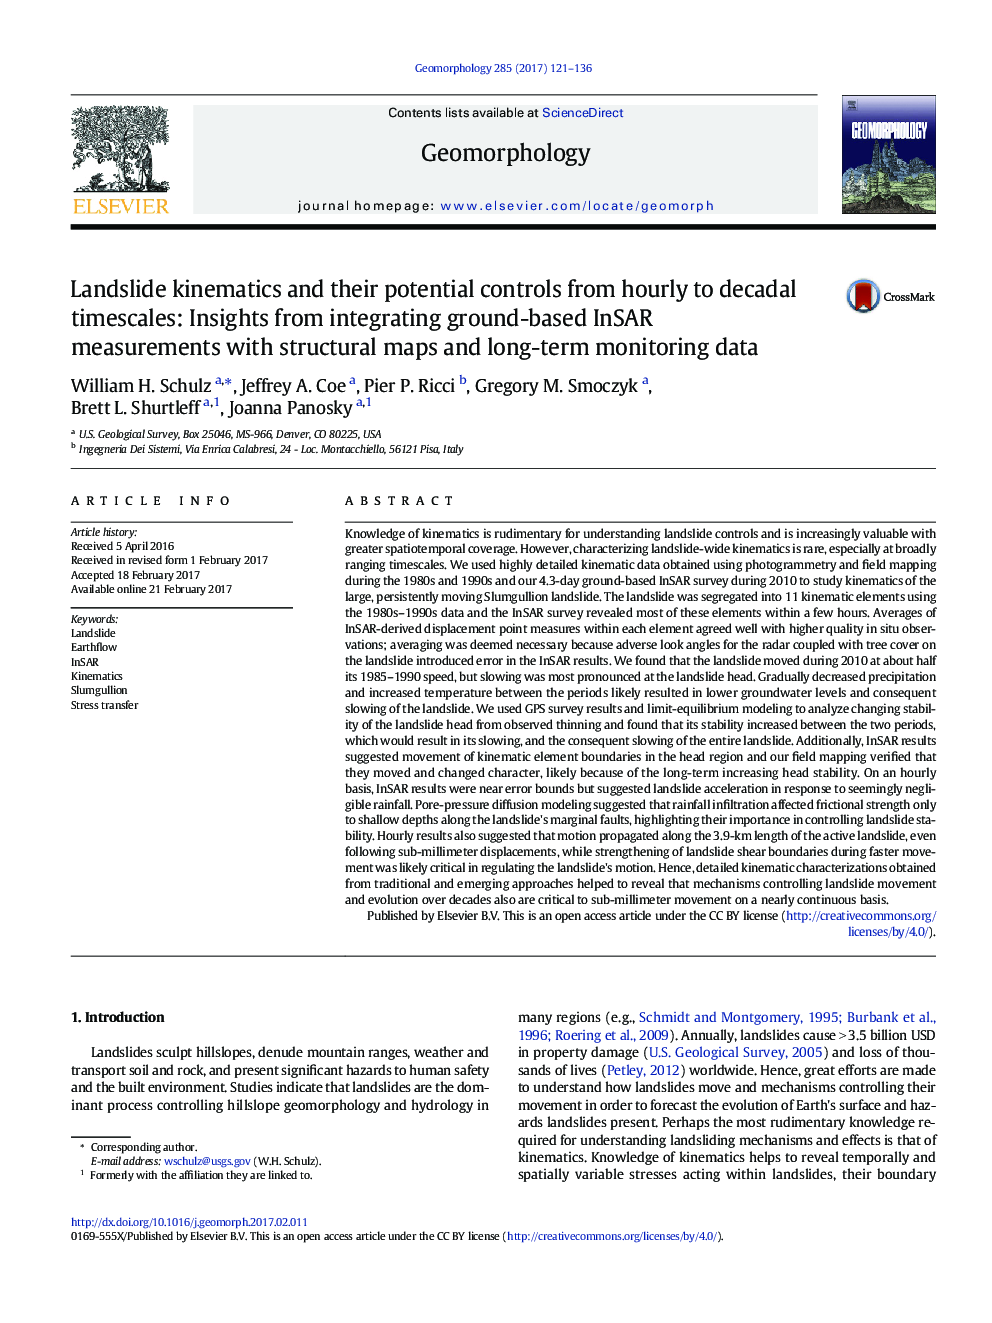 Landslide kinematics and their potential controls from hourly to decadal timescales: Insights from integrating ground-based InSAR measurements with structural maps and long-term monitoring data